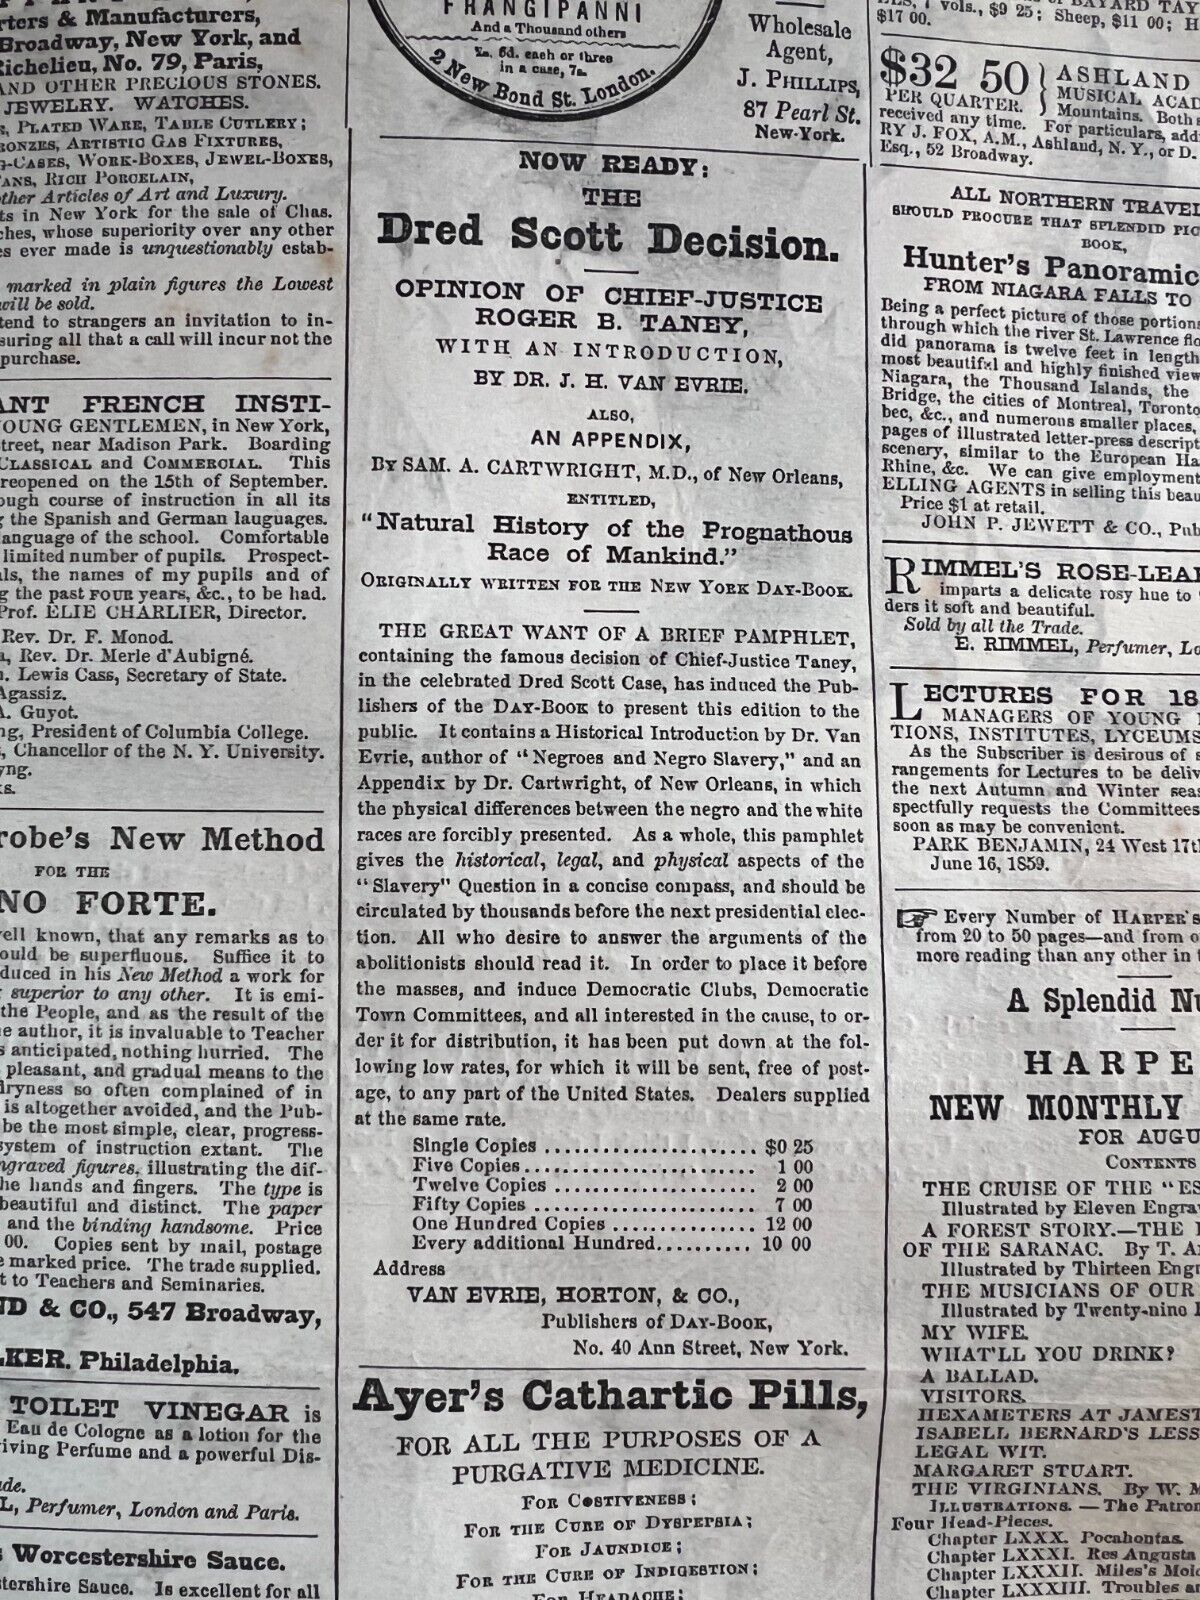 Harper's Weekly 7/23/1859 PRO SLAVERY PAMPHLET AD